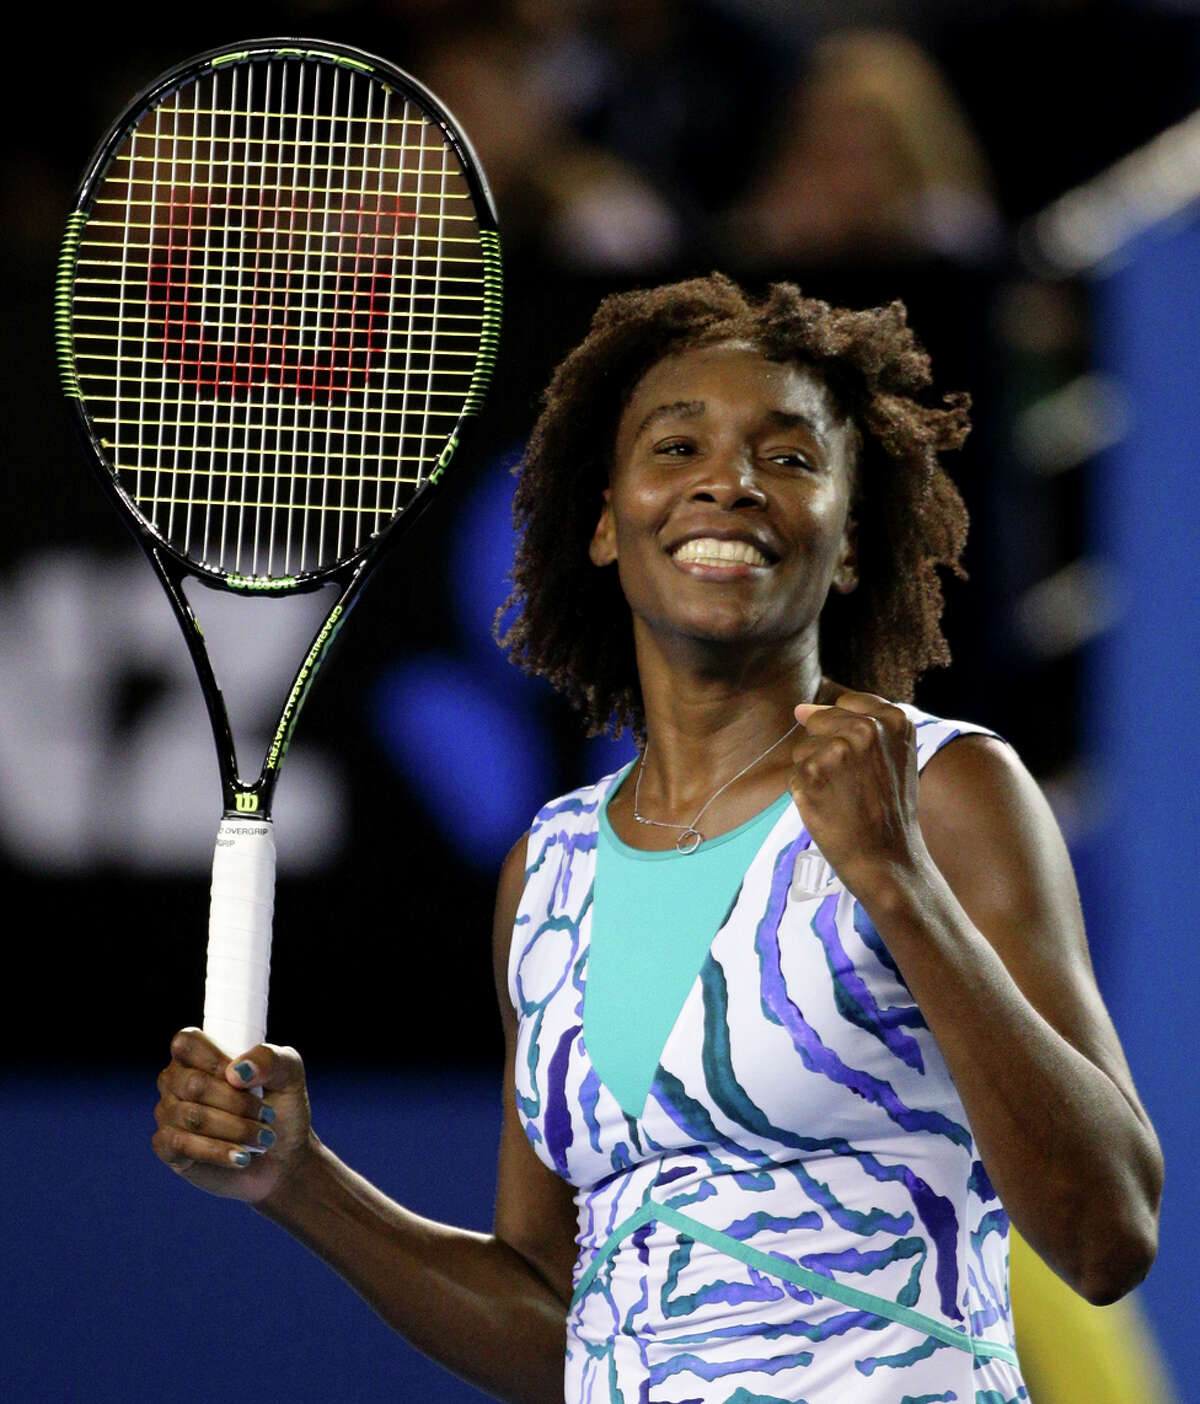 Venus Williams reacts to defeating Agnieszka Radwanska and reaching the quarterfinals at a major for the first time since 2010.